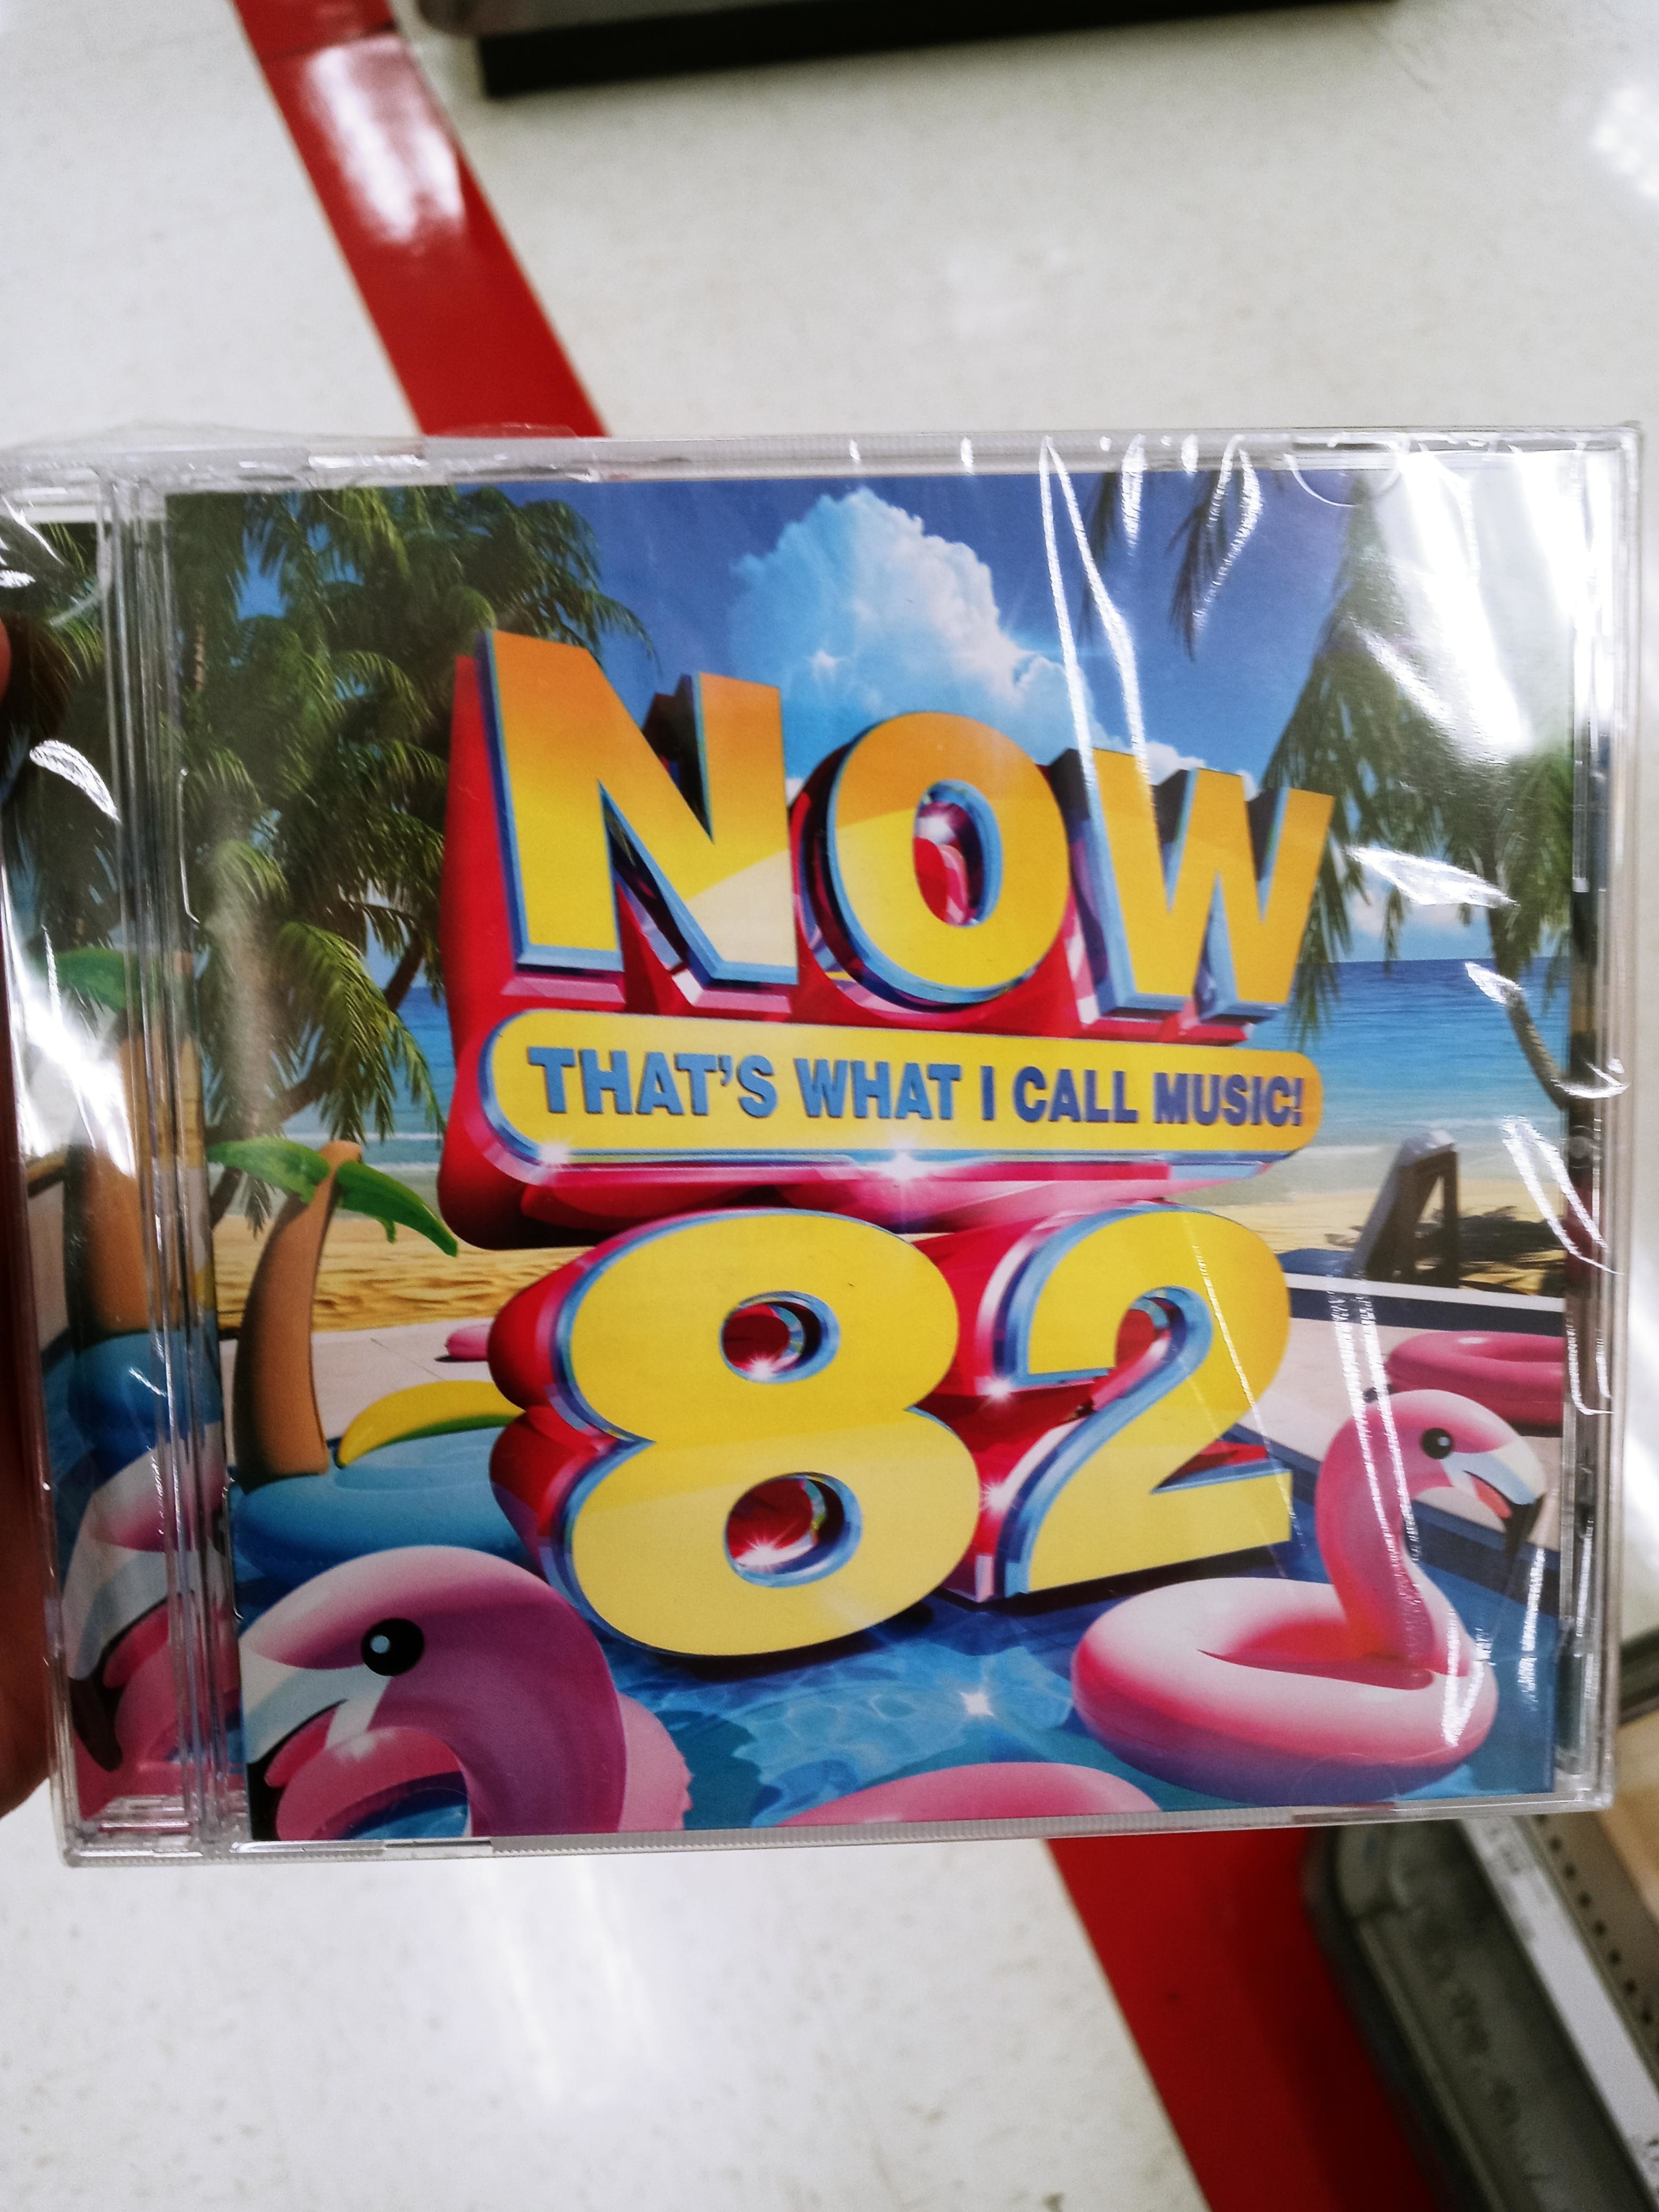 CD cover for &#x27;NOW That’s What I Call Music 82&#x27; with large &#x27;82&#x27; and tropical graphics